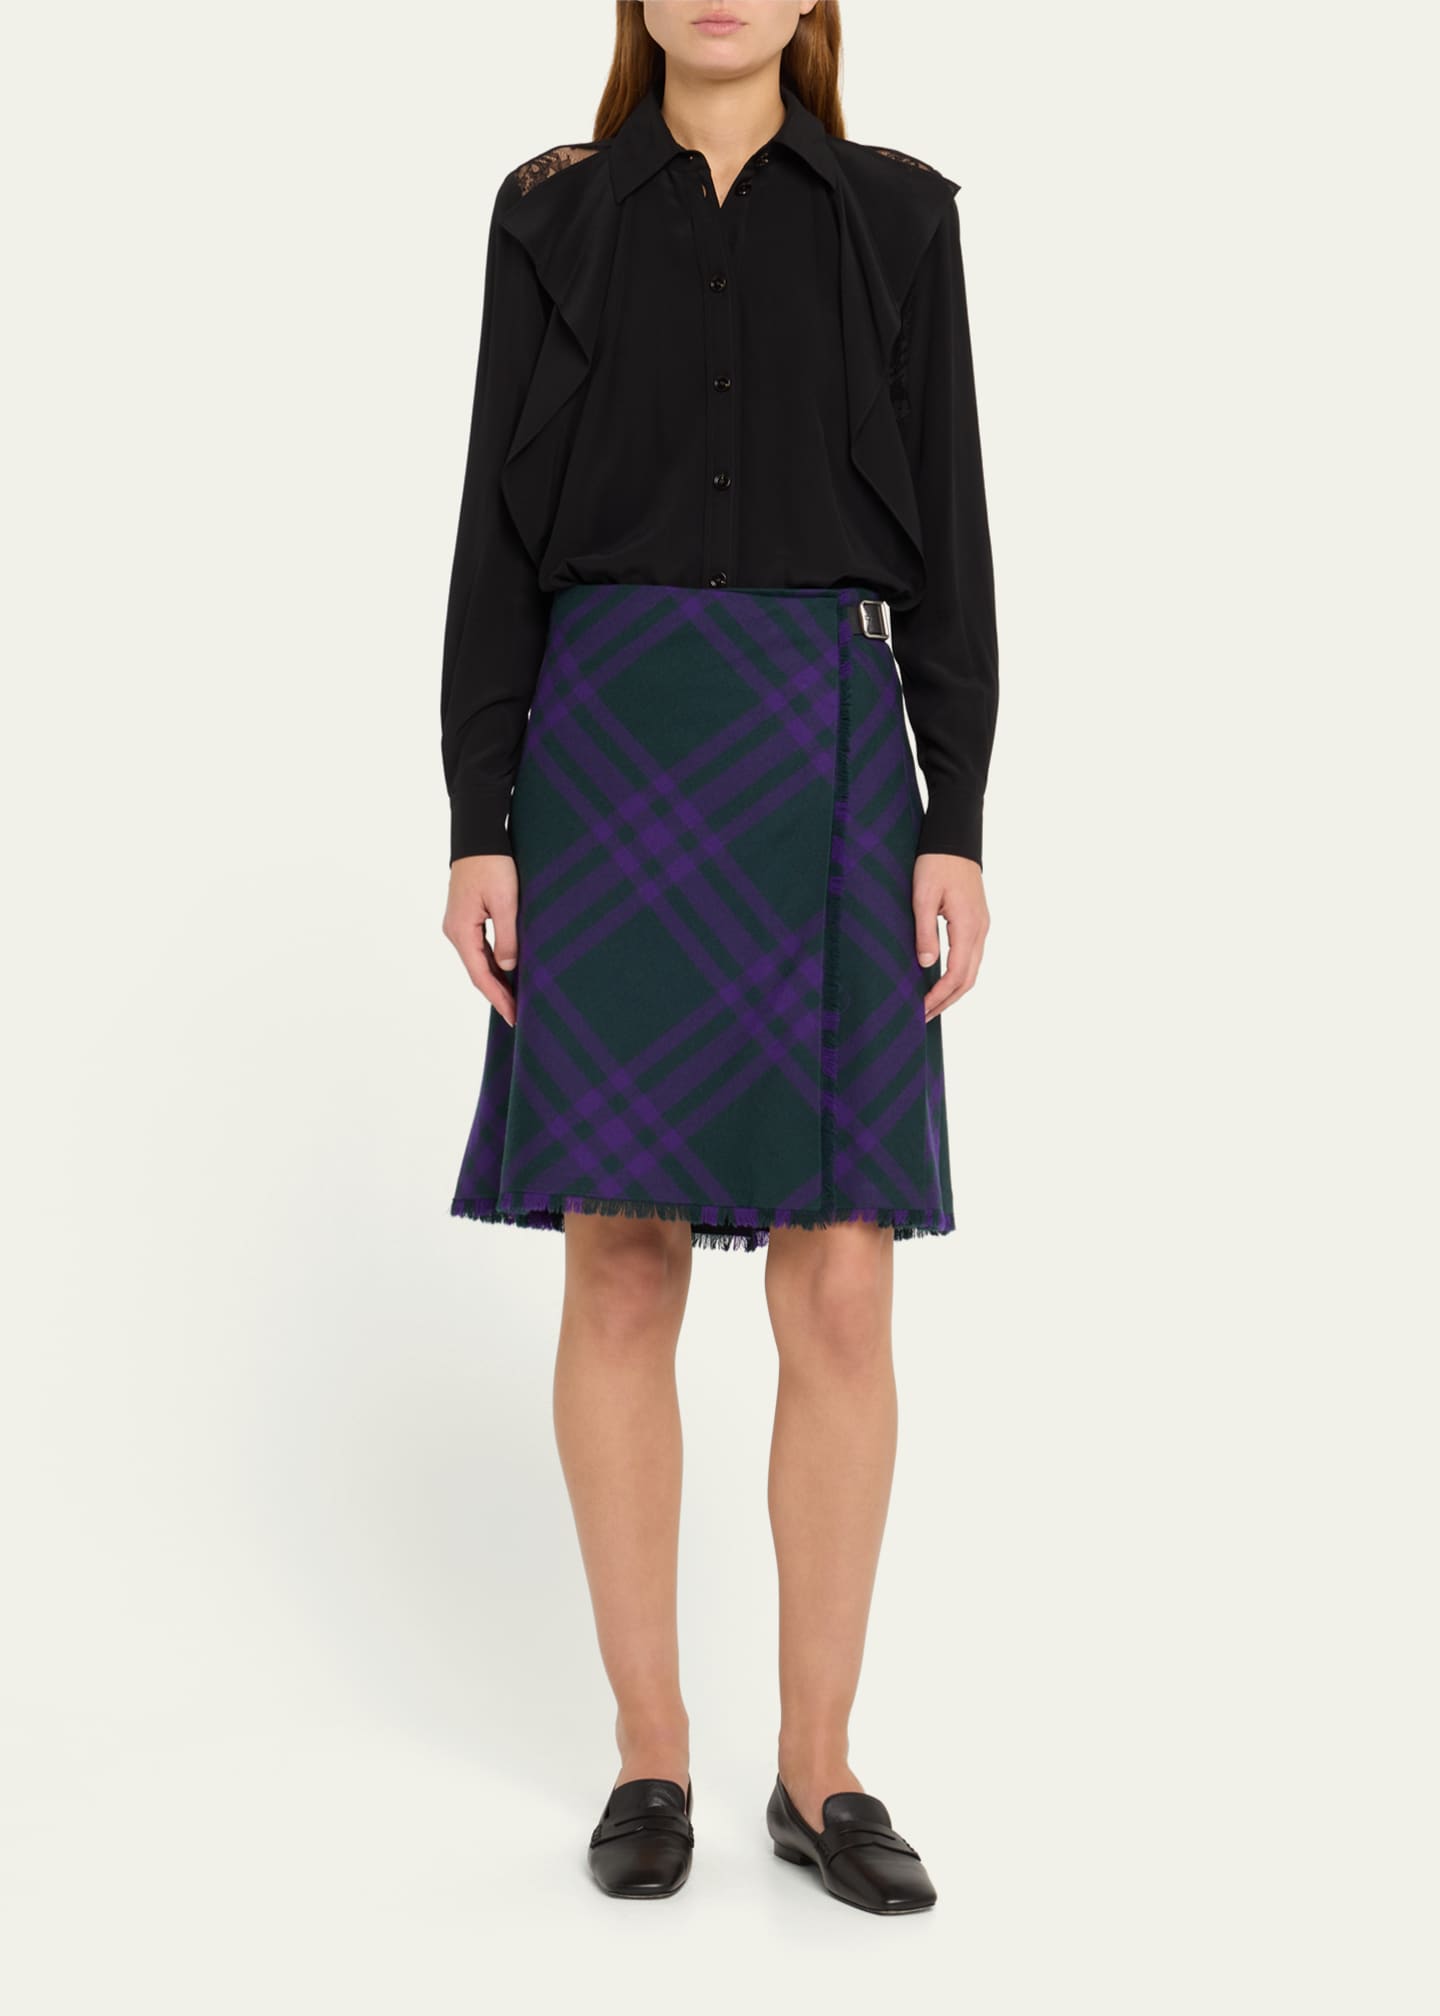 Burberry Check Print Kilt with Belted Detail - Bergdorf Goodman